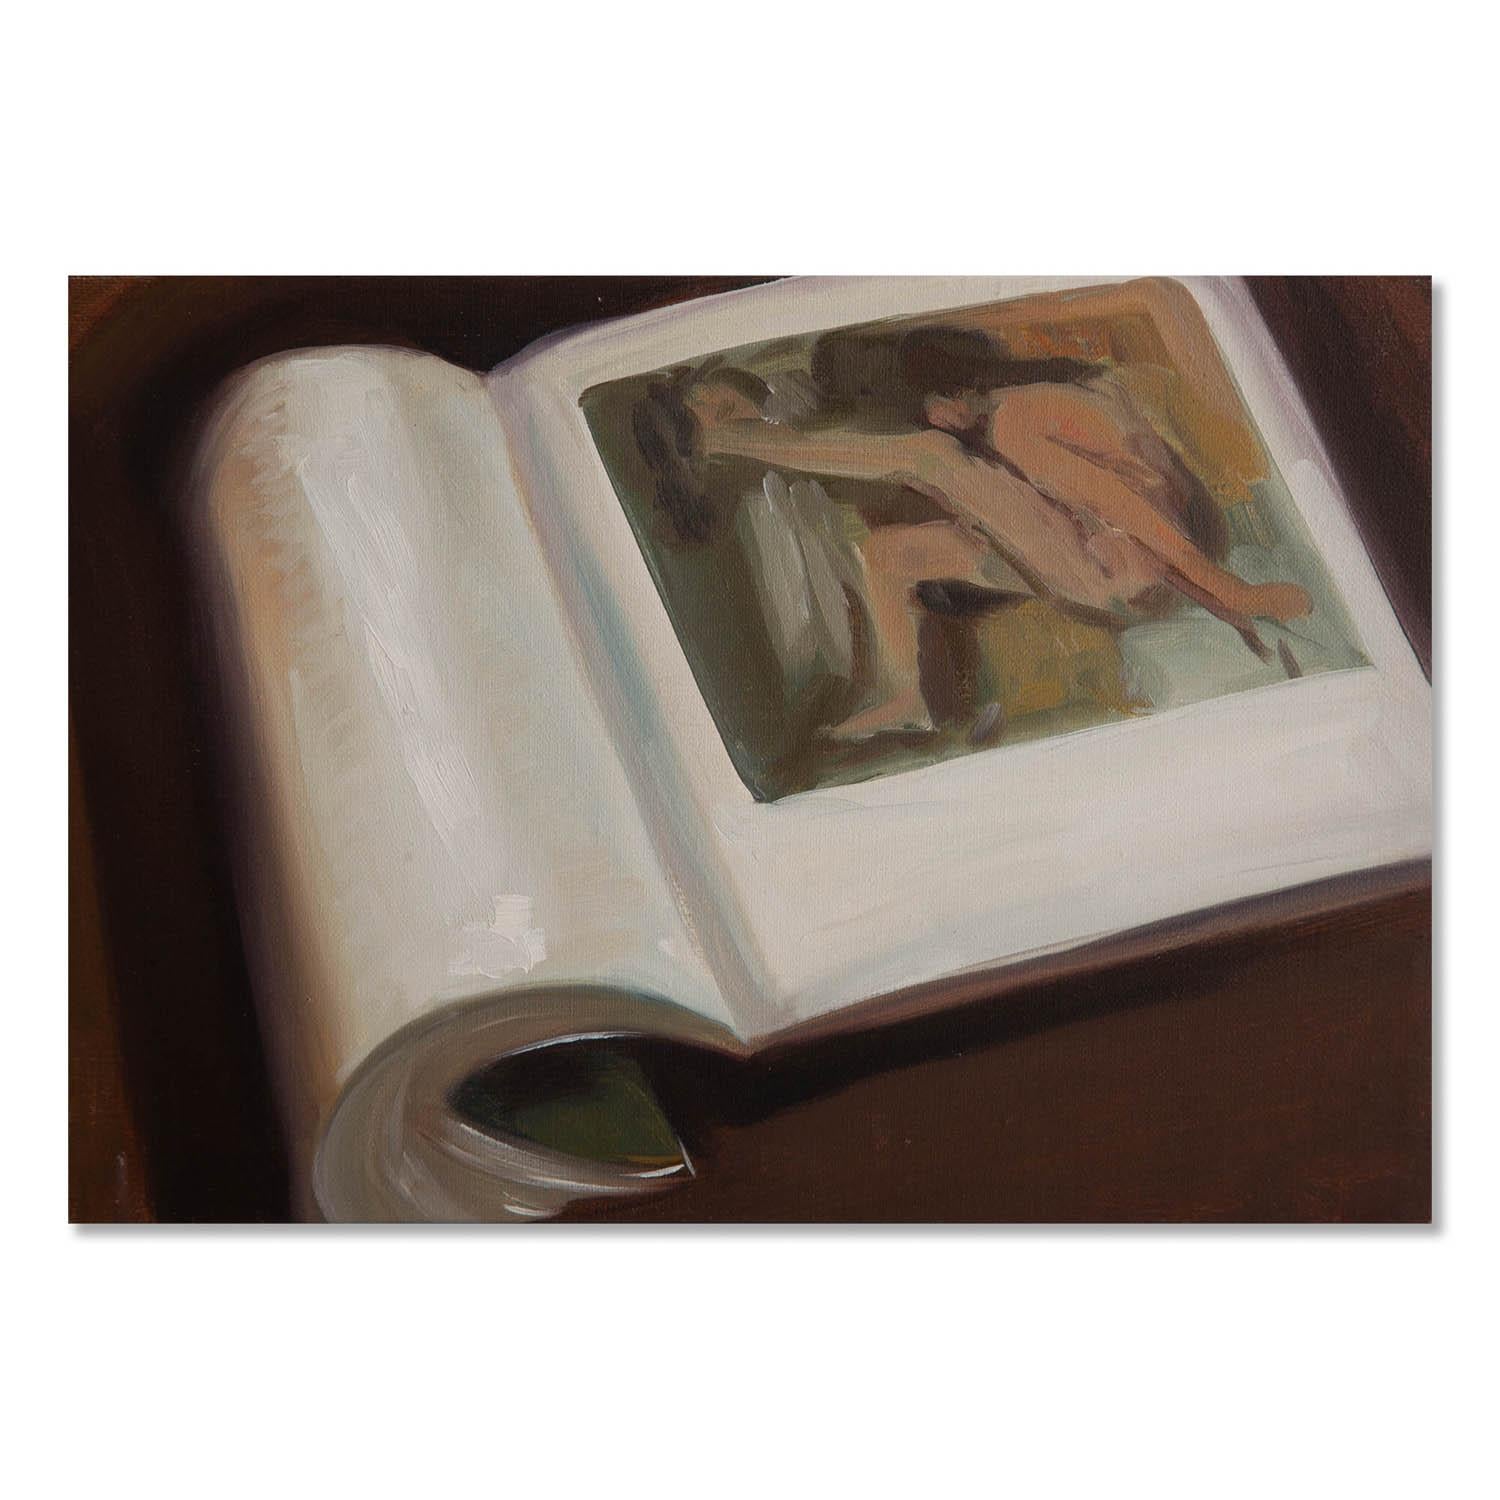  Title: Still Life With Book 
 Medium: Oil on canvas
 Size: 8.5 x 12 inches
 Frame: Framing options available!
 Condition: The painting appears to be in excellent condition.
 
 Year: 2000 Circa
 Artist: Dongxing Huang
 Signature: Unsigned
 Signature